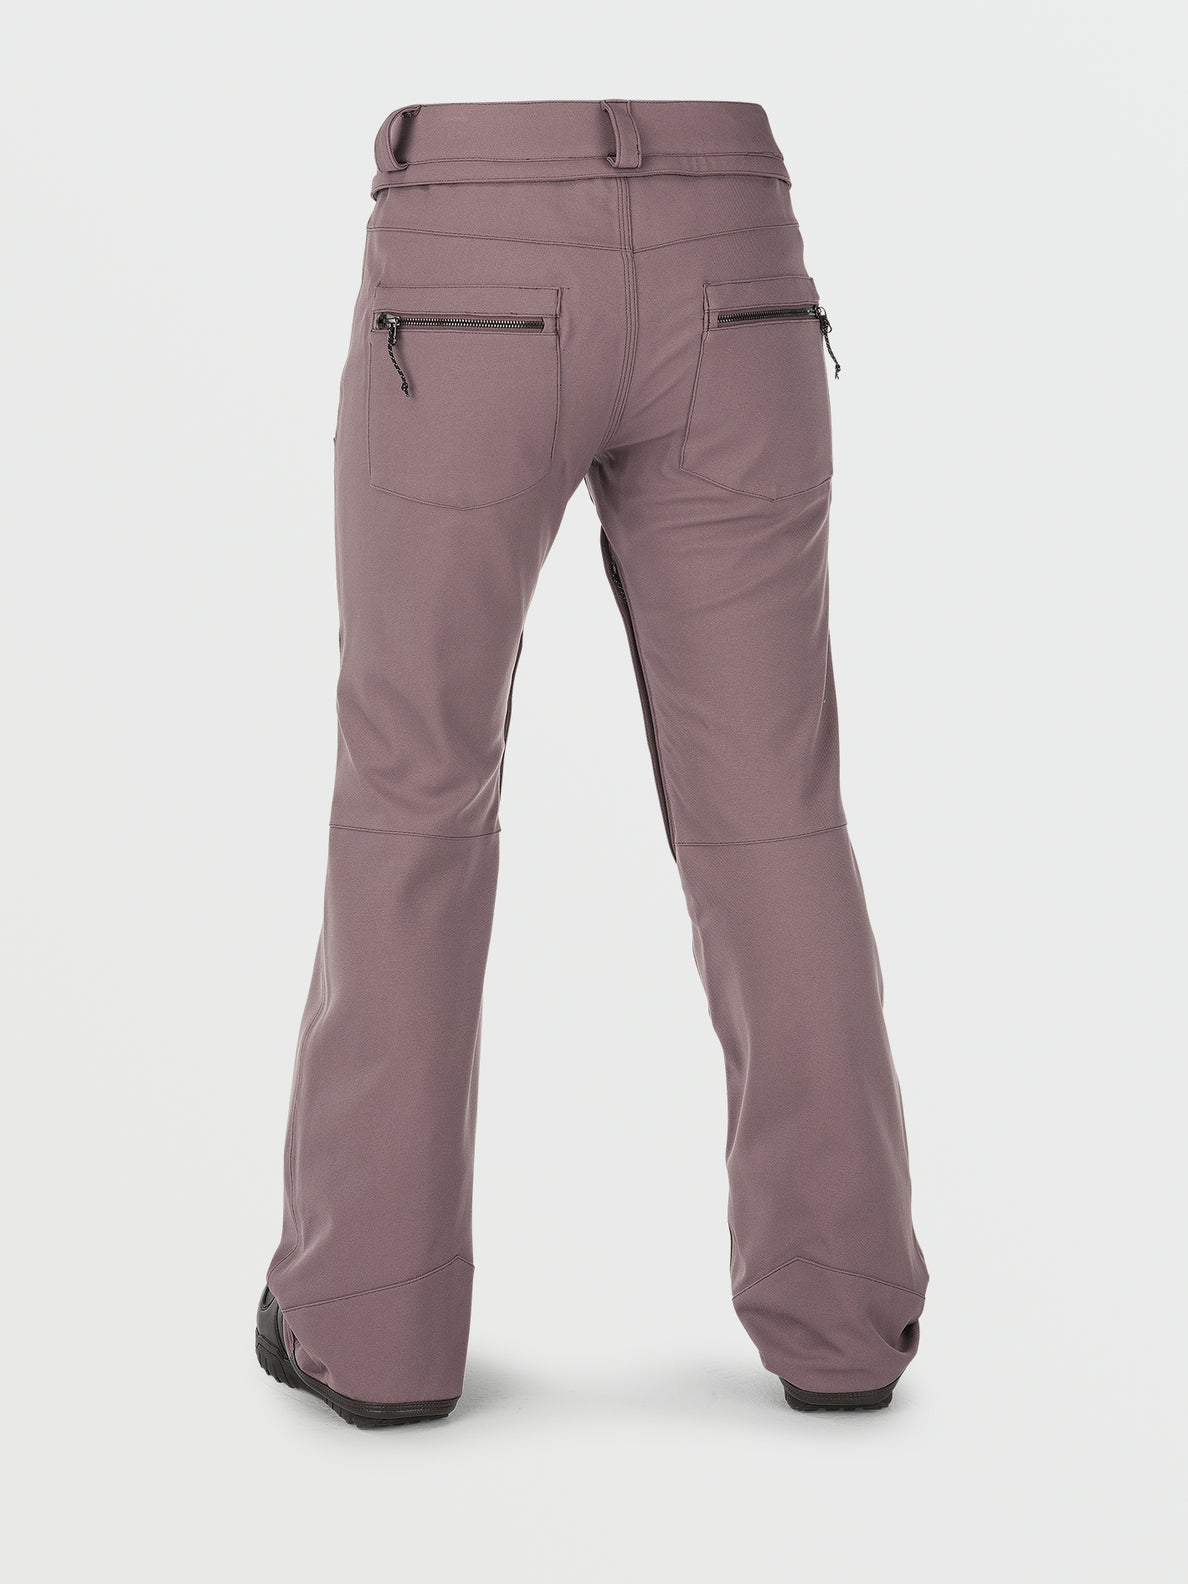 Womens Species Stretch Pants - Rosewood (2022) – Volcom